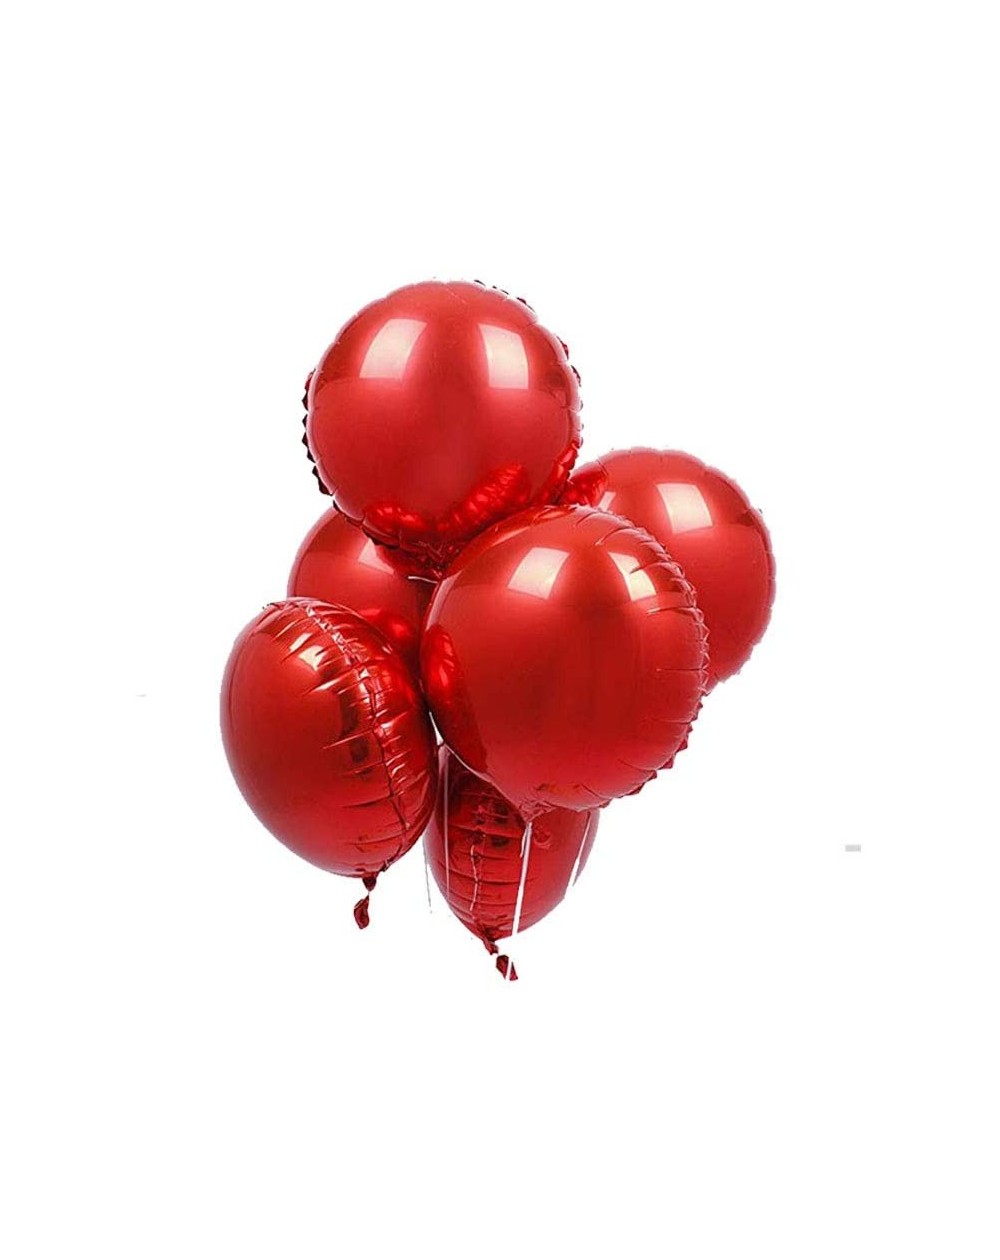 Balloons 20pcs 18 inch Red Round Balloons- Round Shaped Foil Helium Balloons Mylar Balloons for Wedding Birthday Baby Shower ...